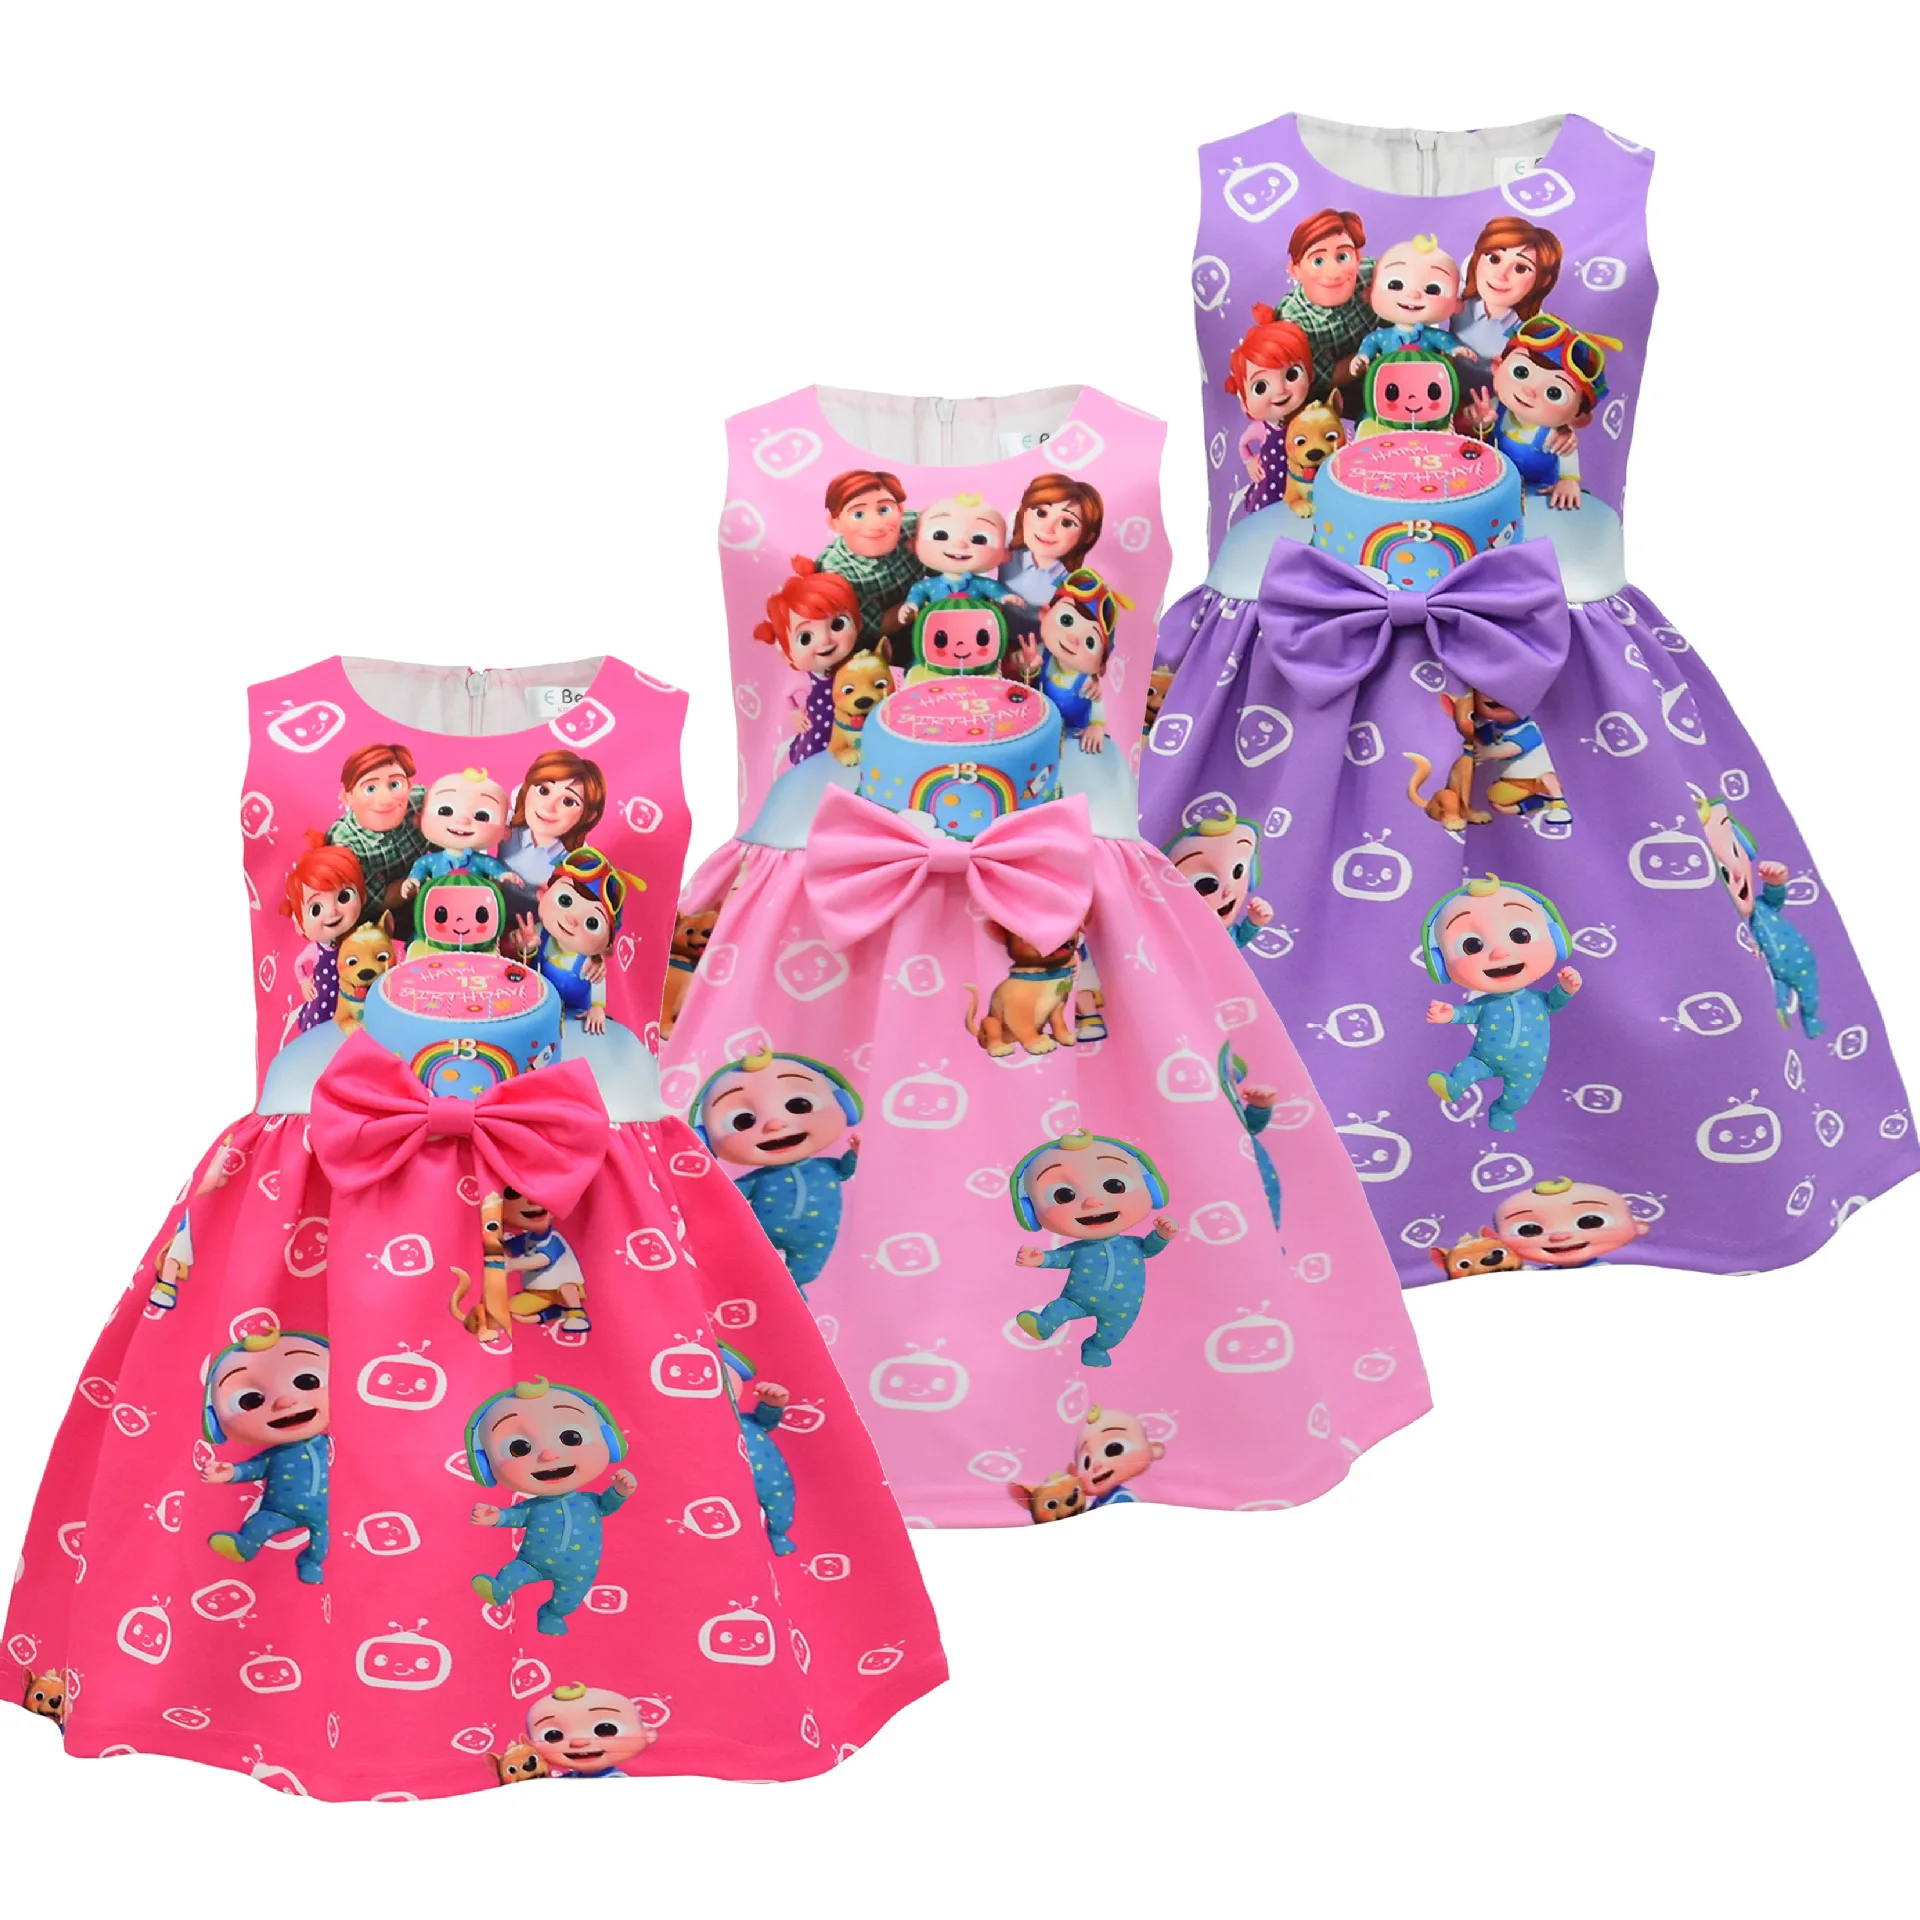 High Quality Girls Princess Dress Cute Cartoon Cocomeloned Printed Fancy Skirt Charm Children Bow Birthday Party Dress